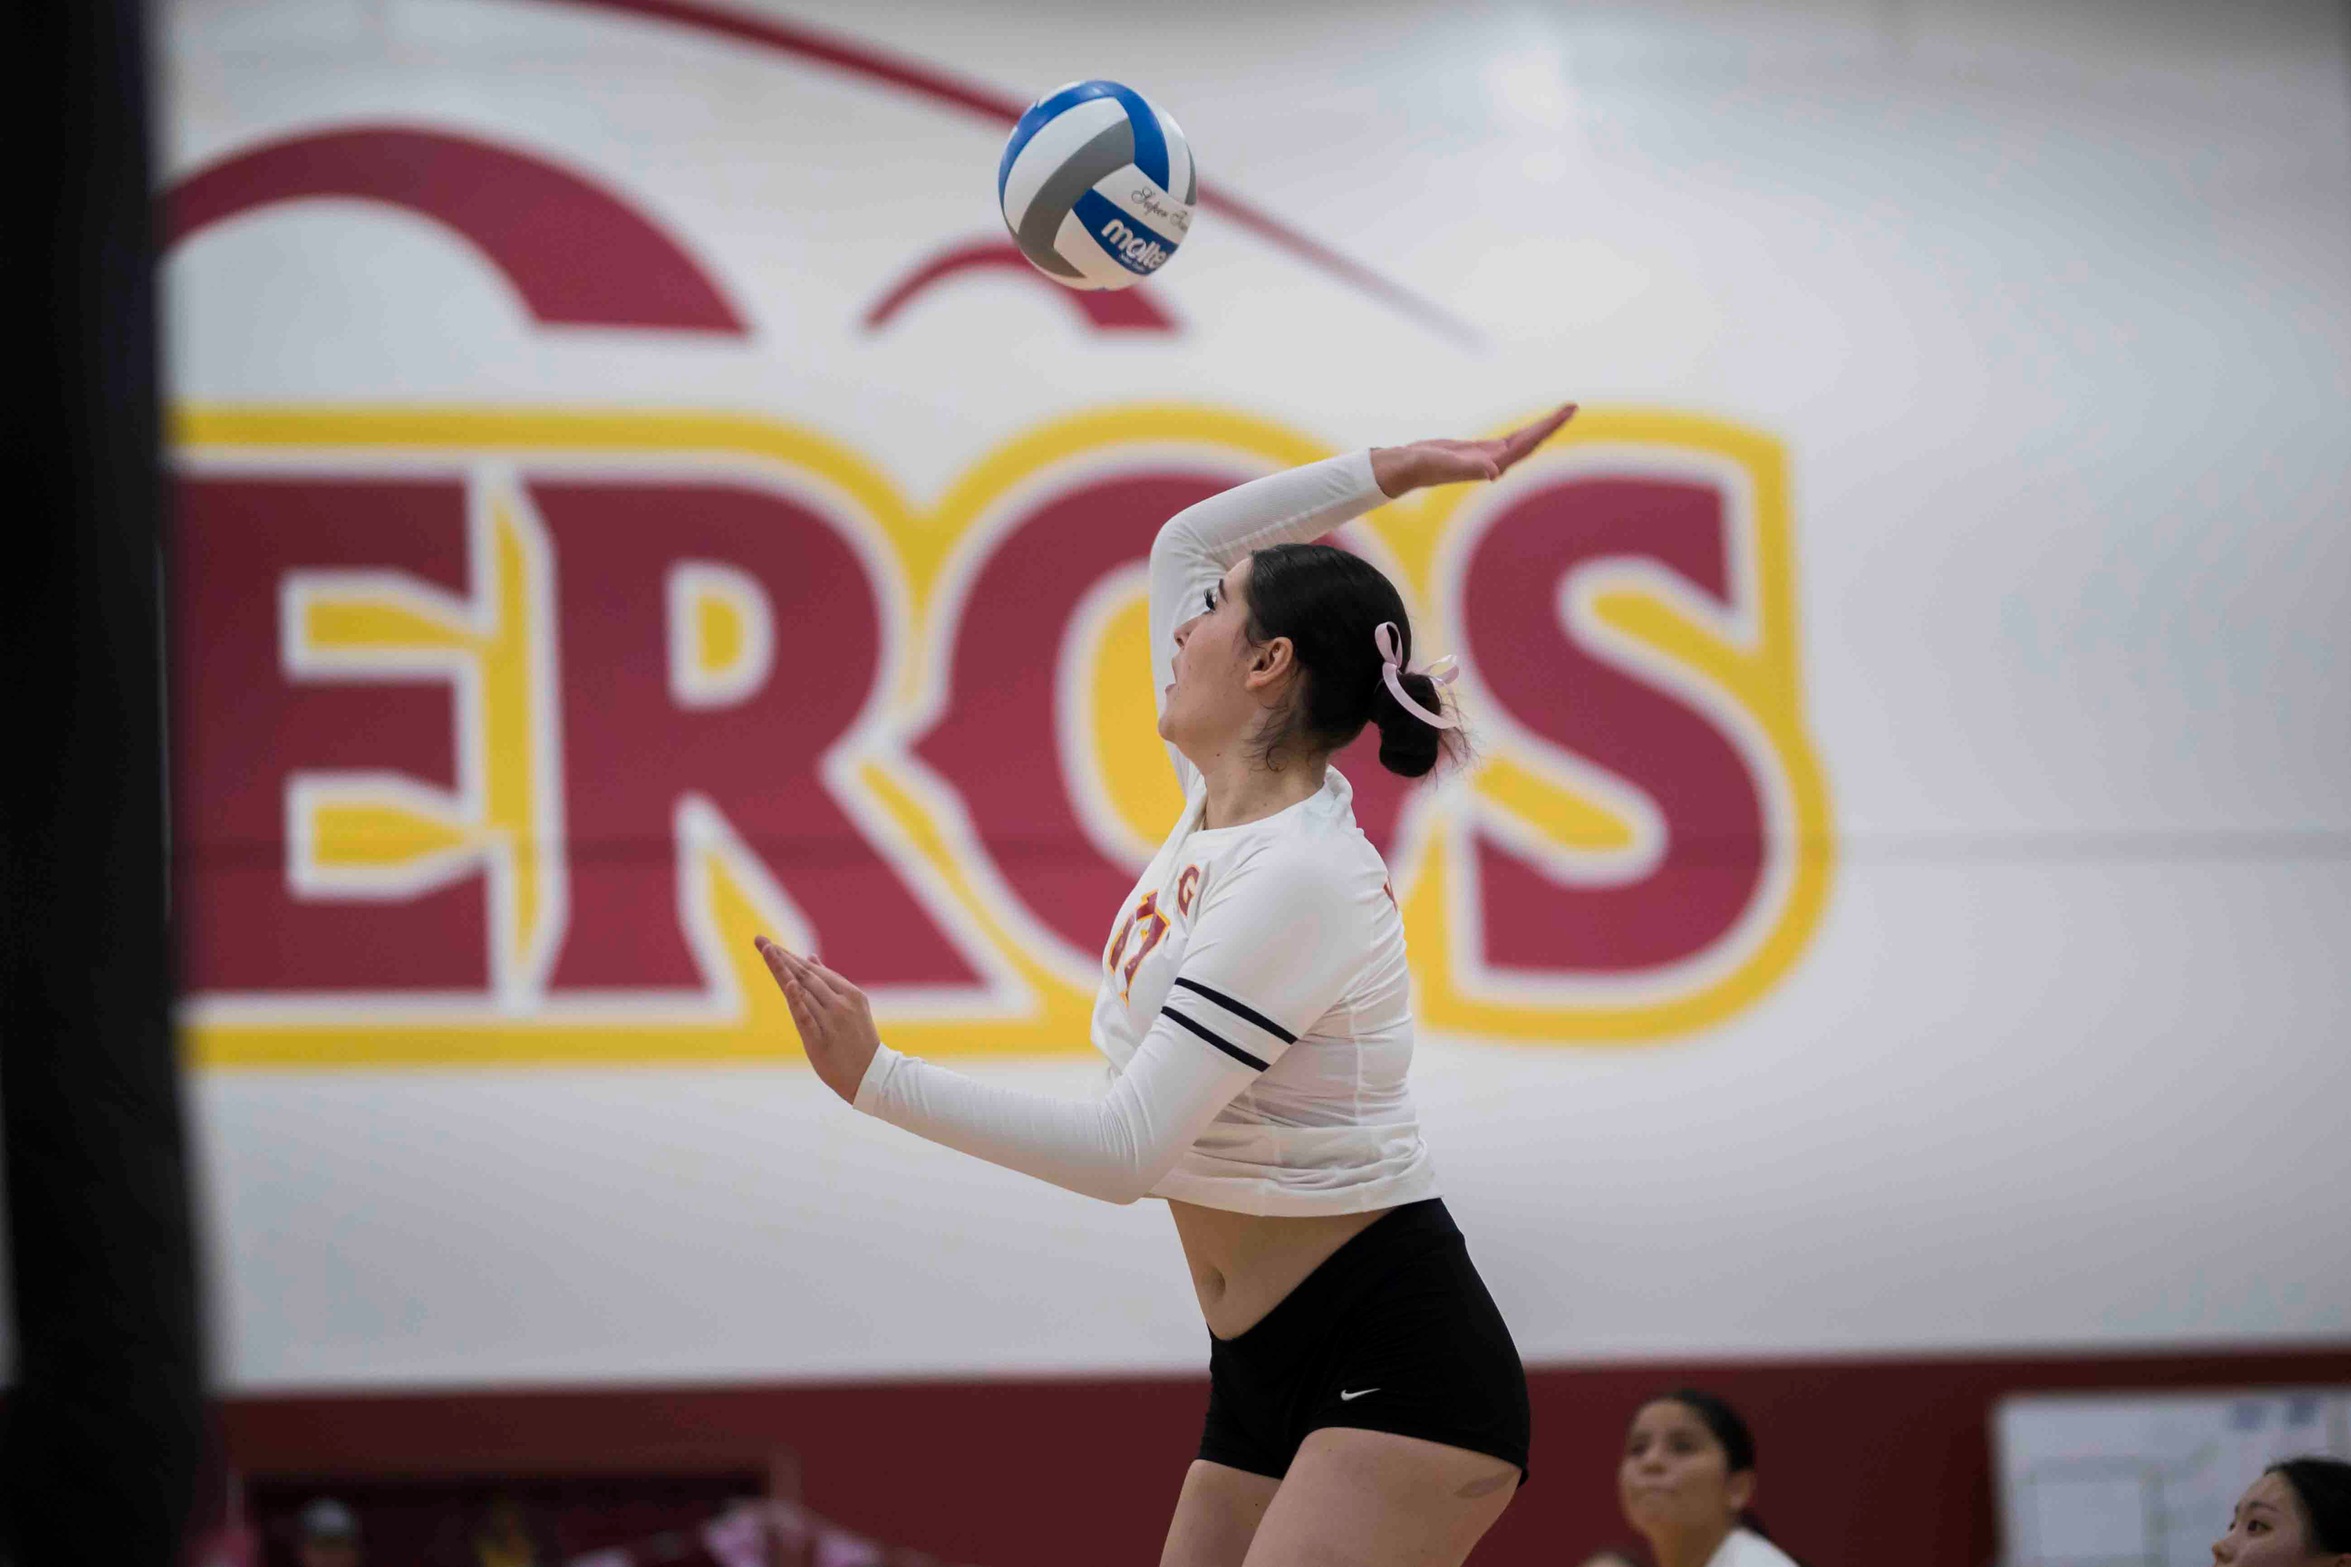 Lady Vaqs play inspired Volleyball to beat Antelope Valley and support Dig Pink Foundation